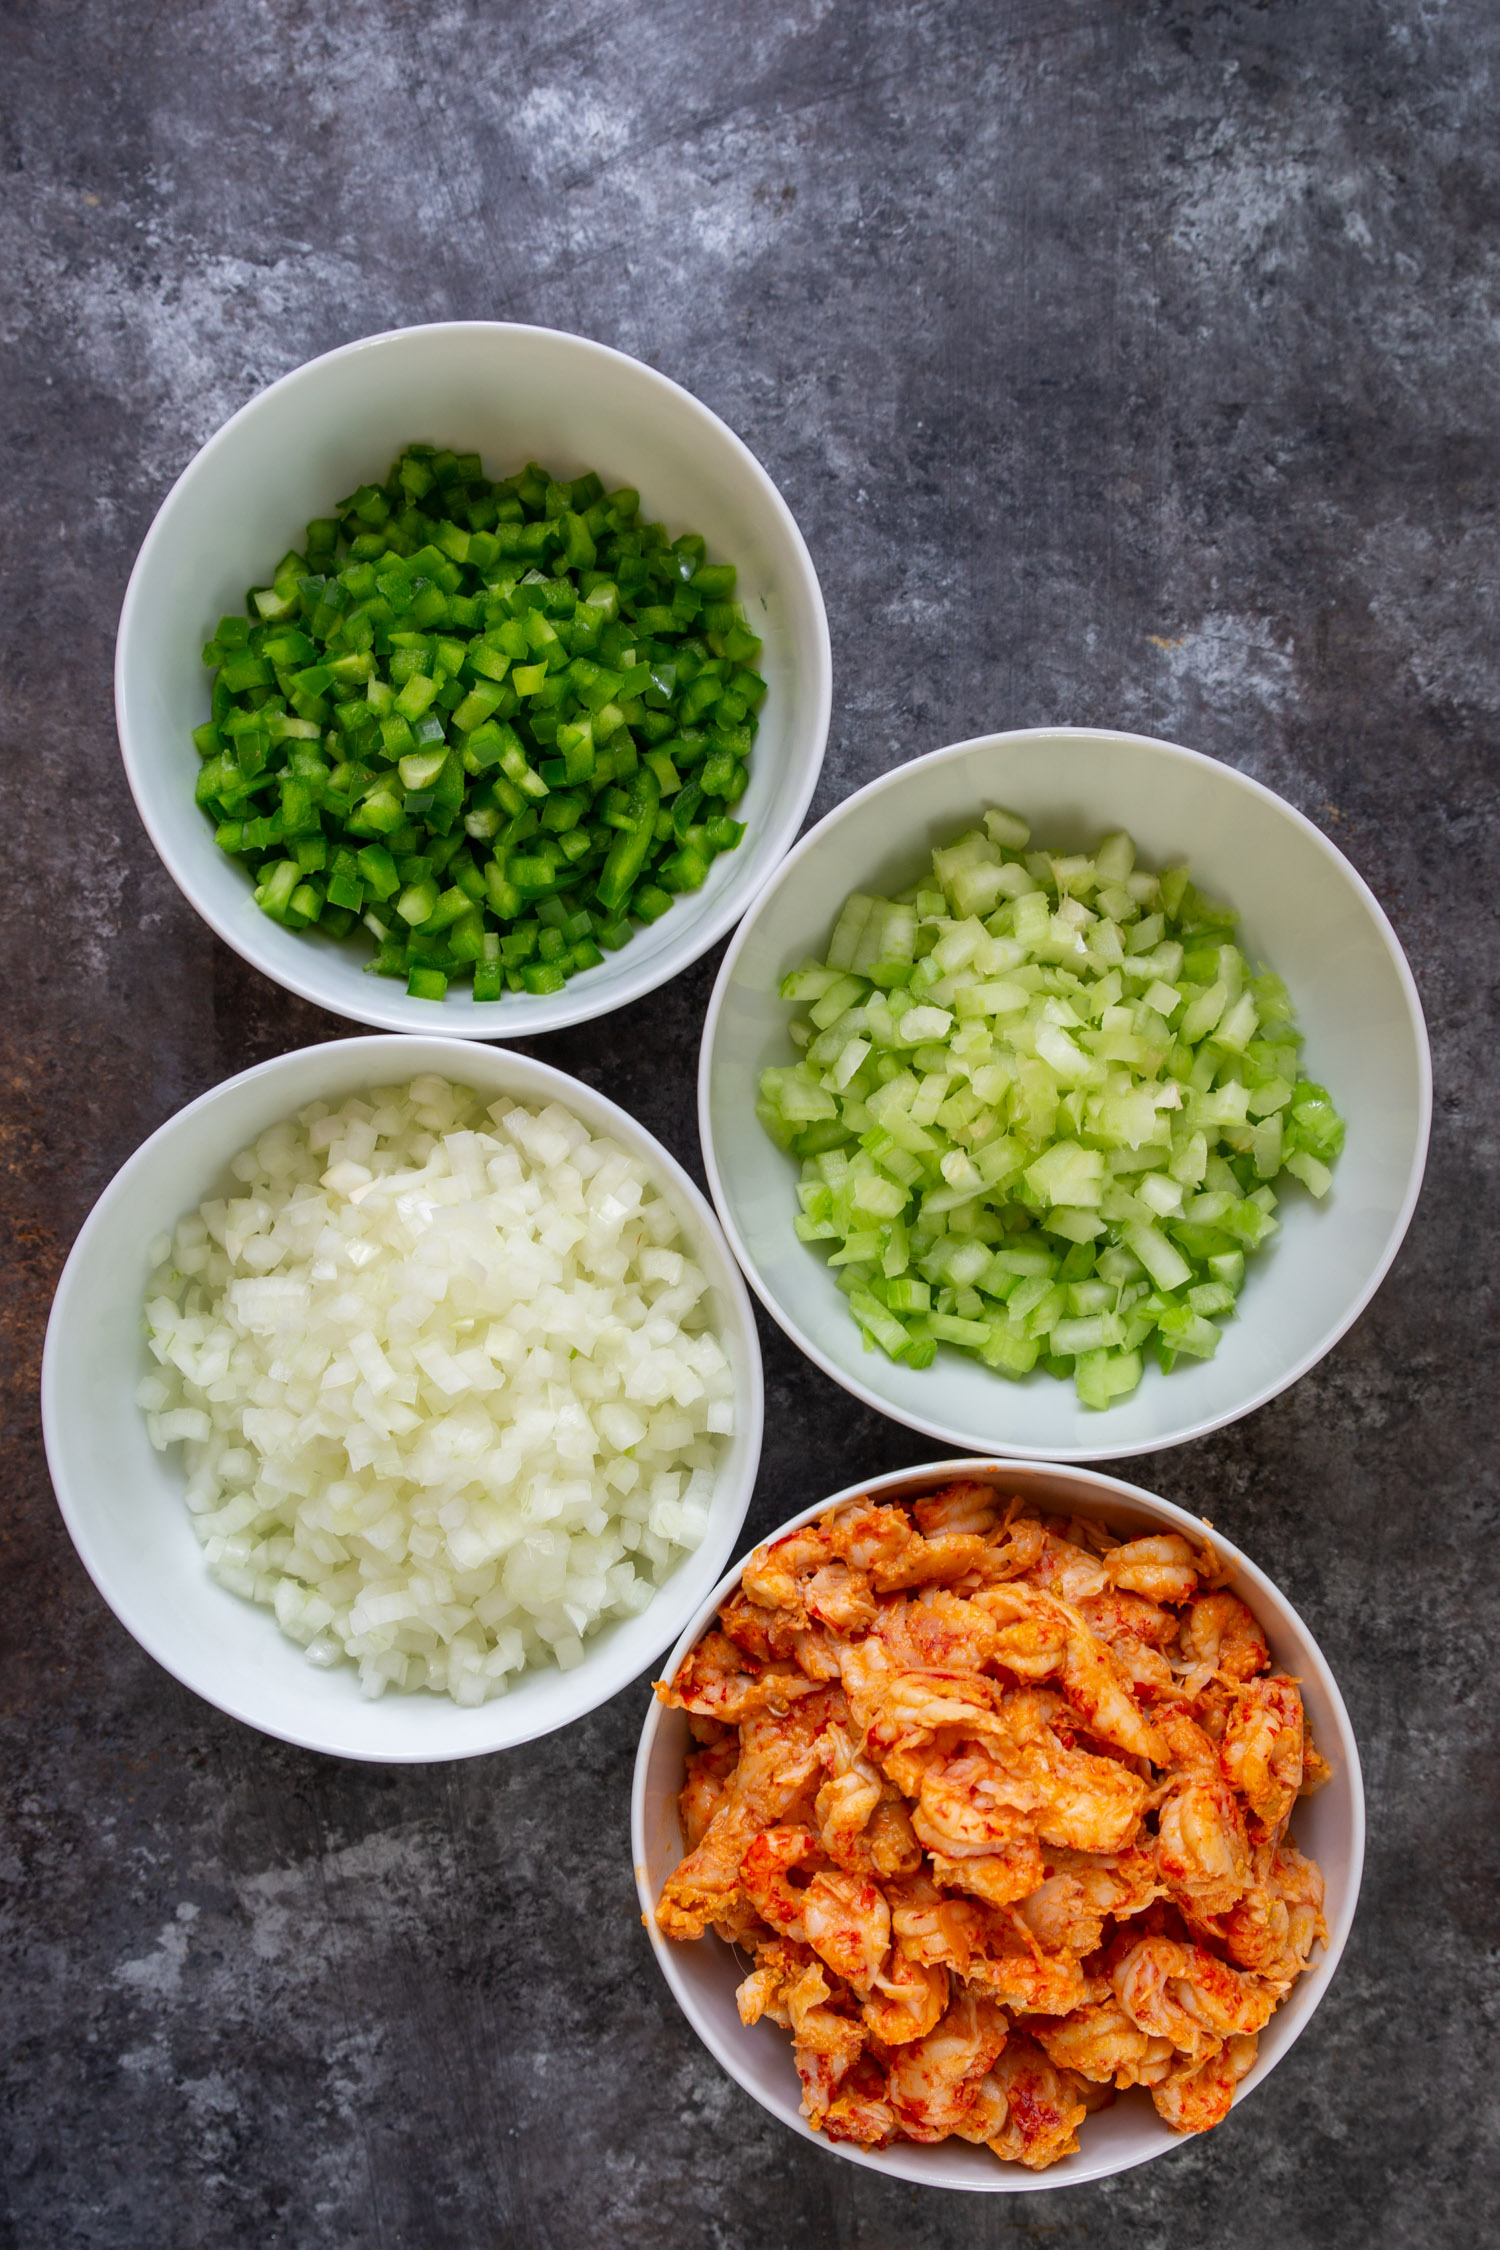 Bowls of white onion, celery, green bell peppers, and cooked crawfish tails.